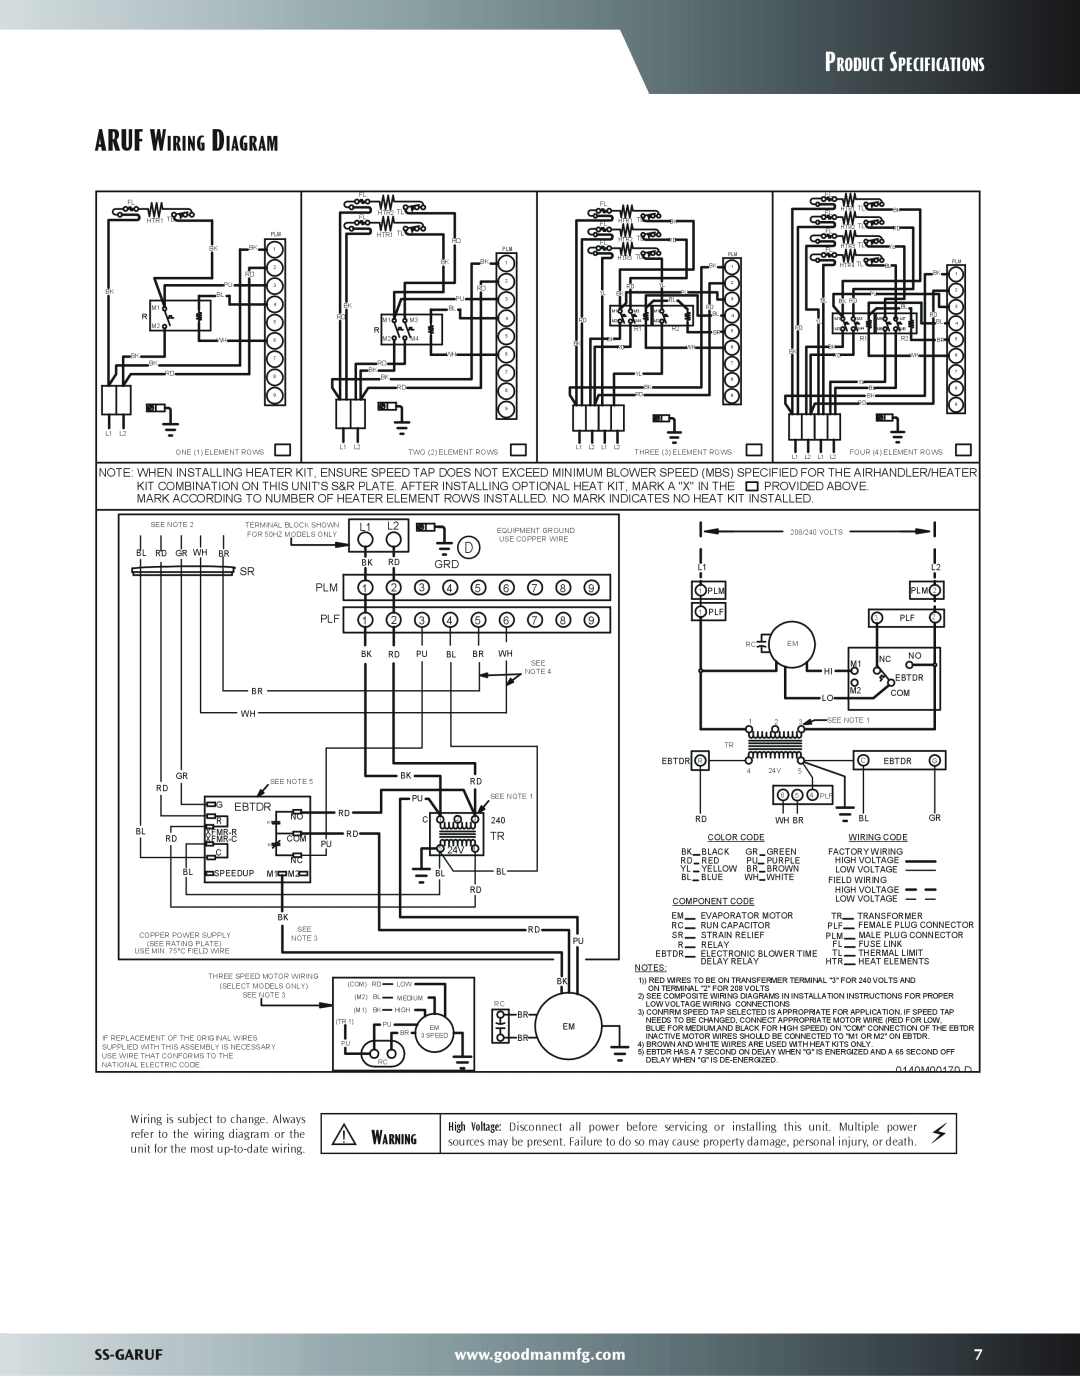 Goodmans Multi-Position, Three-Speed Air Handler With Galvanized Cabinet ARUF Wiring Diagram, Product Specifications 